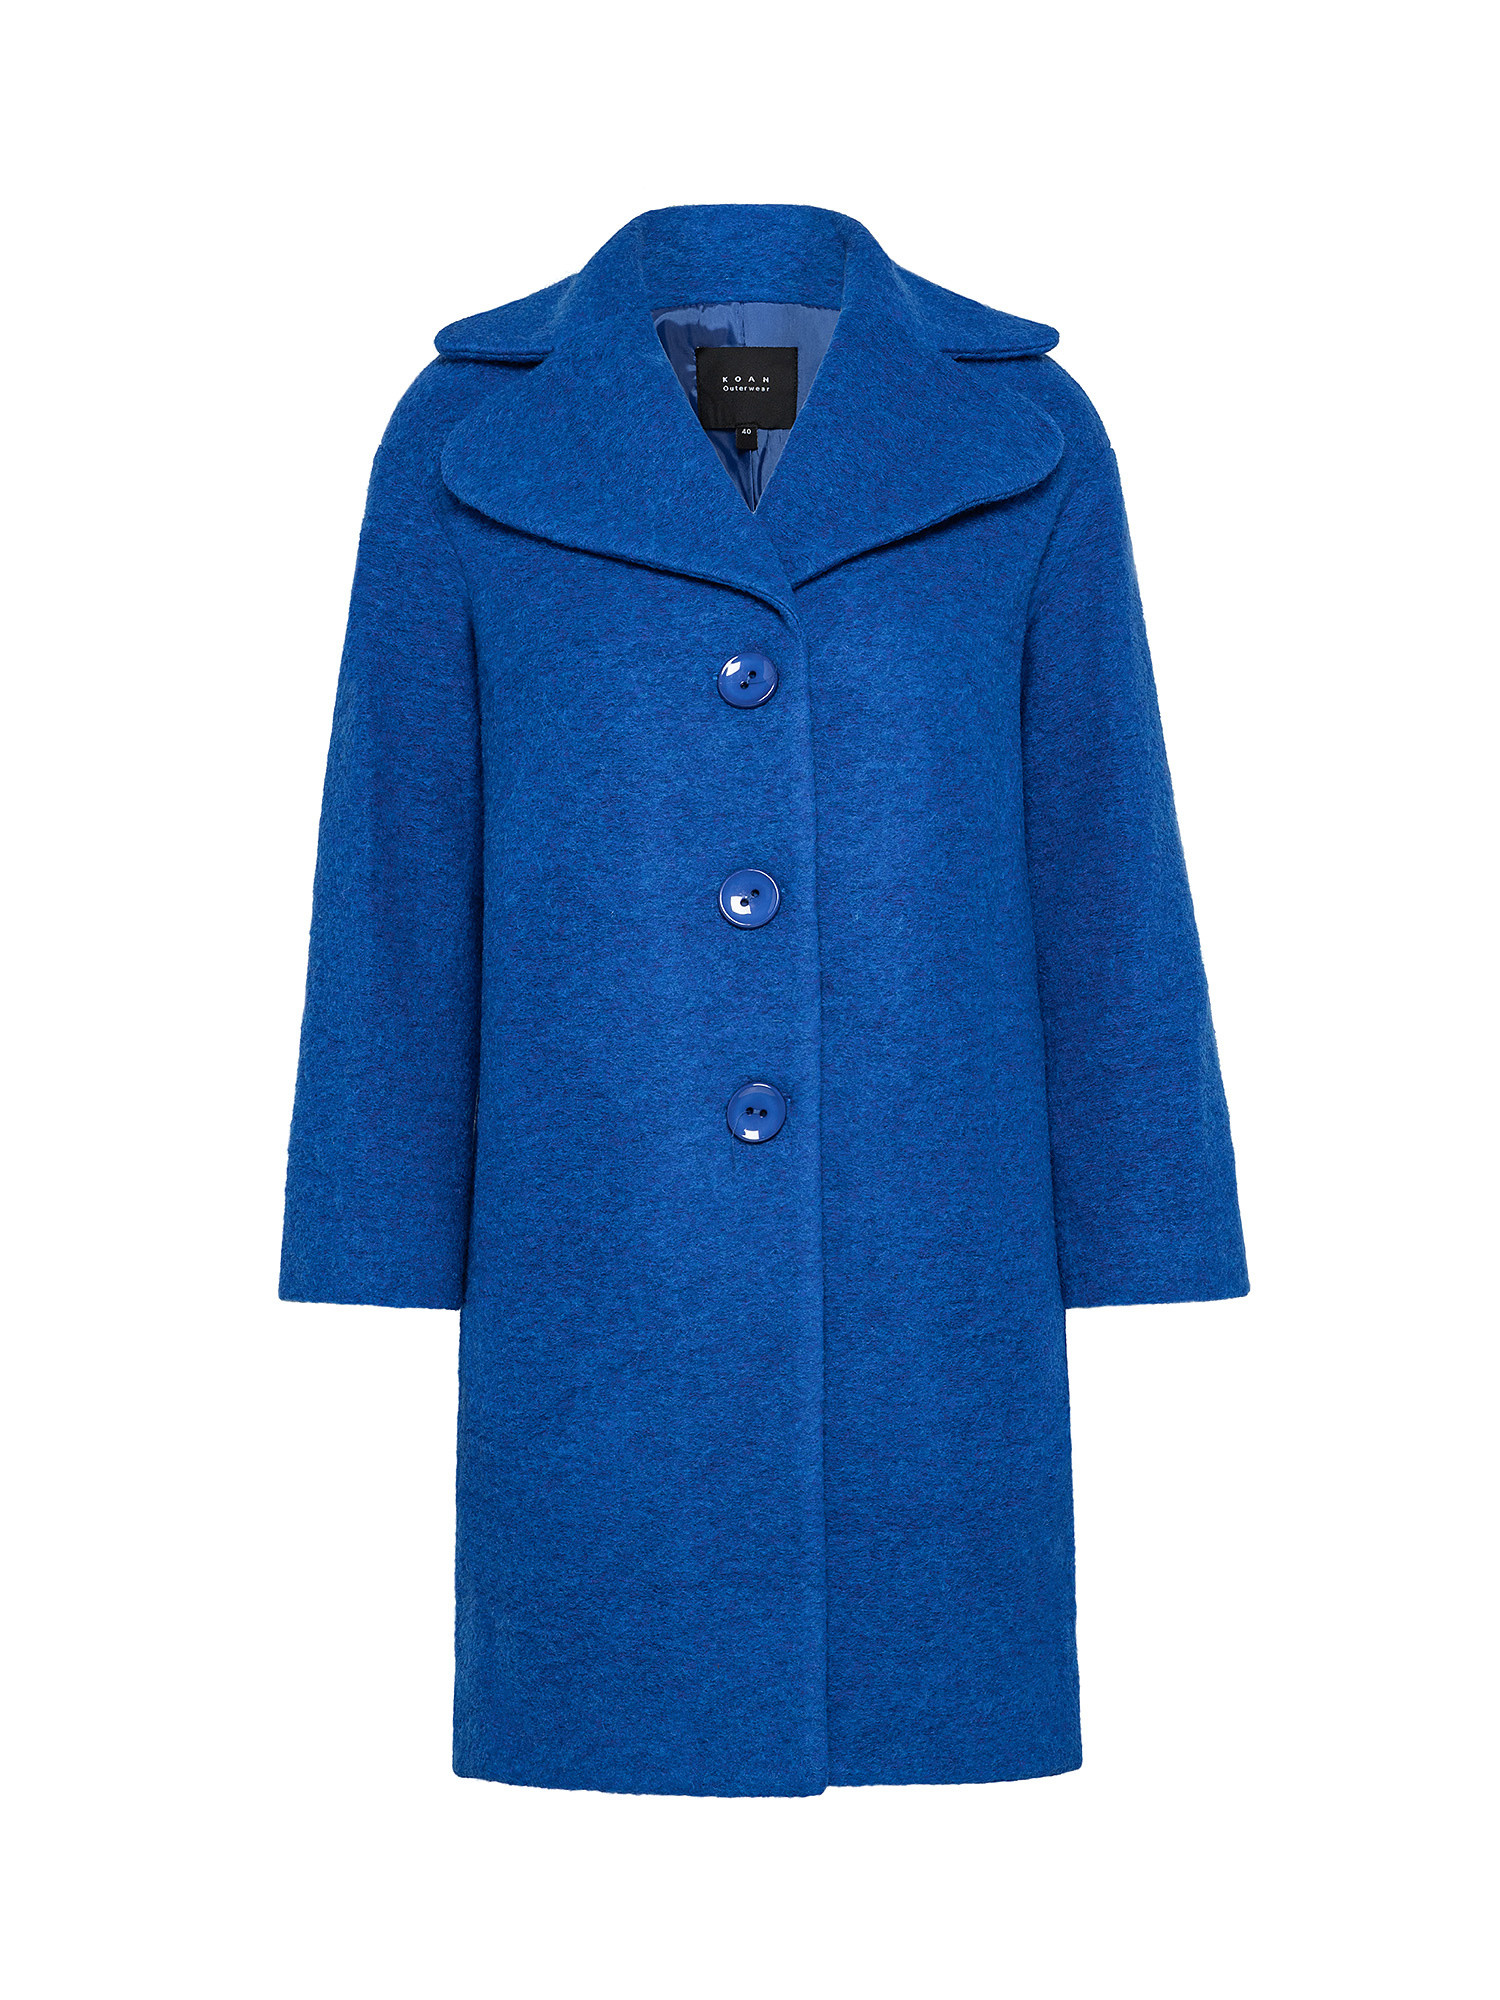 Cappotto in lana cotta, Blu royal, large image number 0